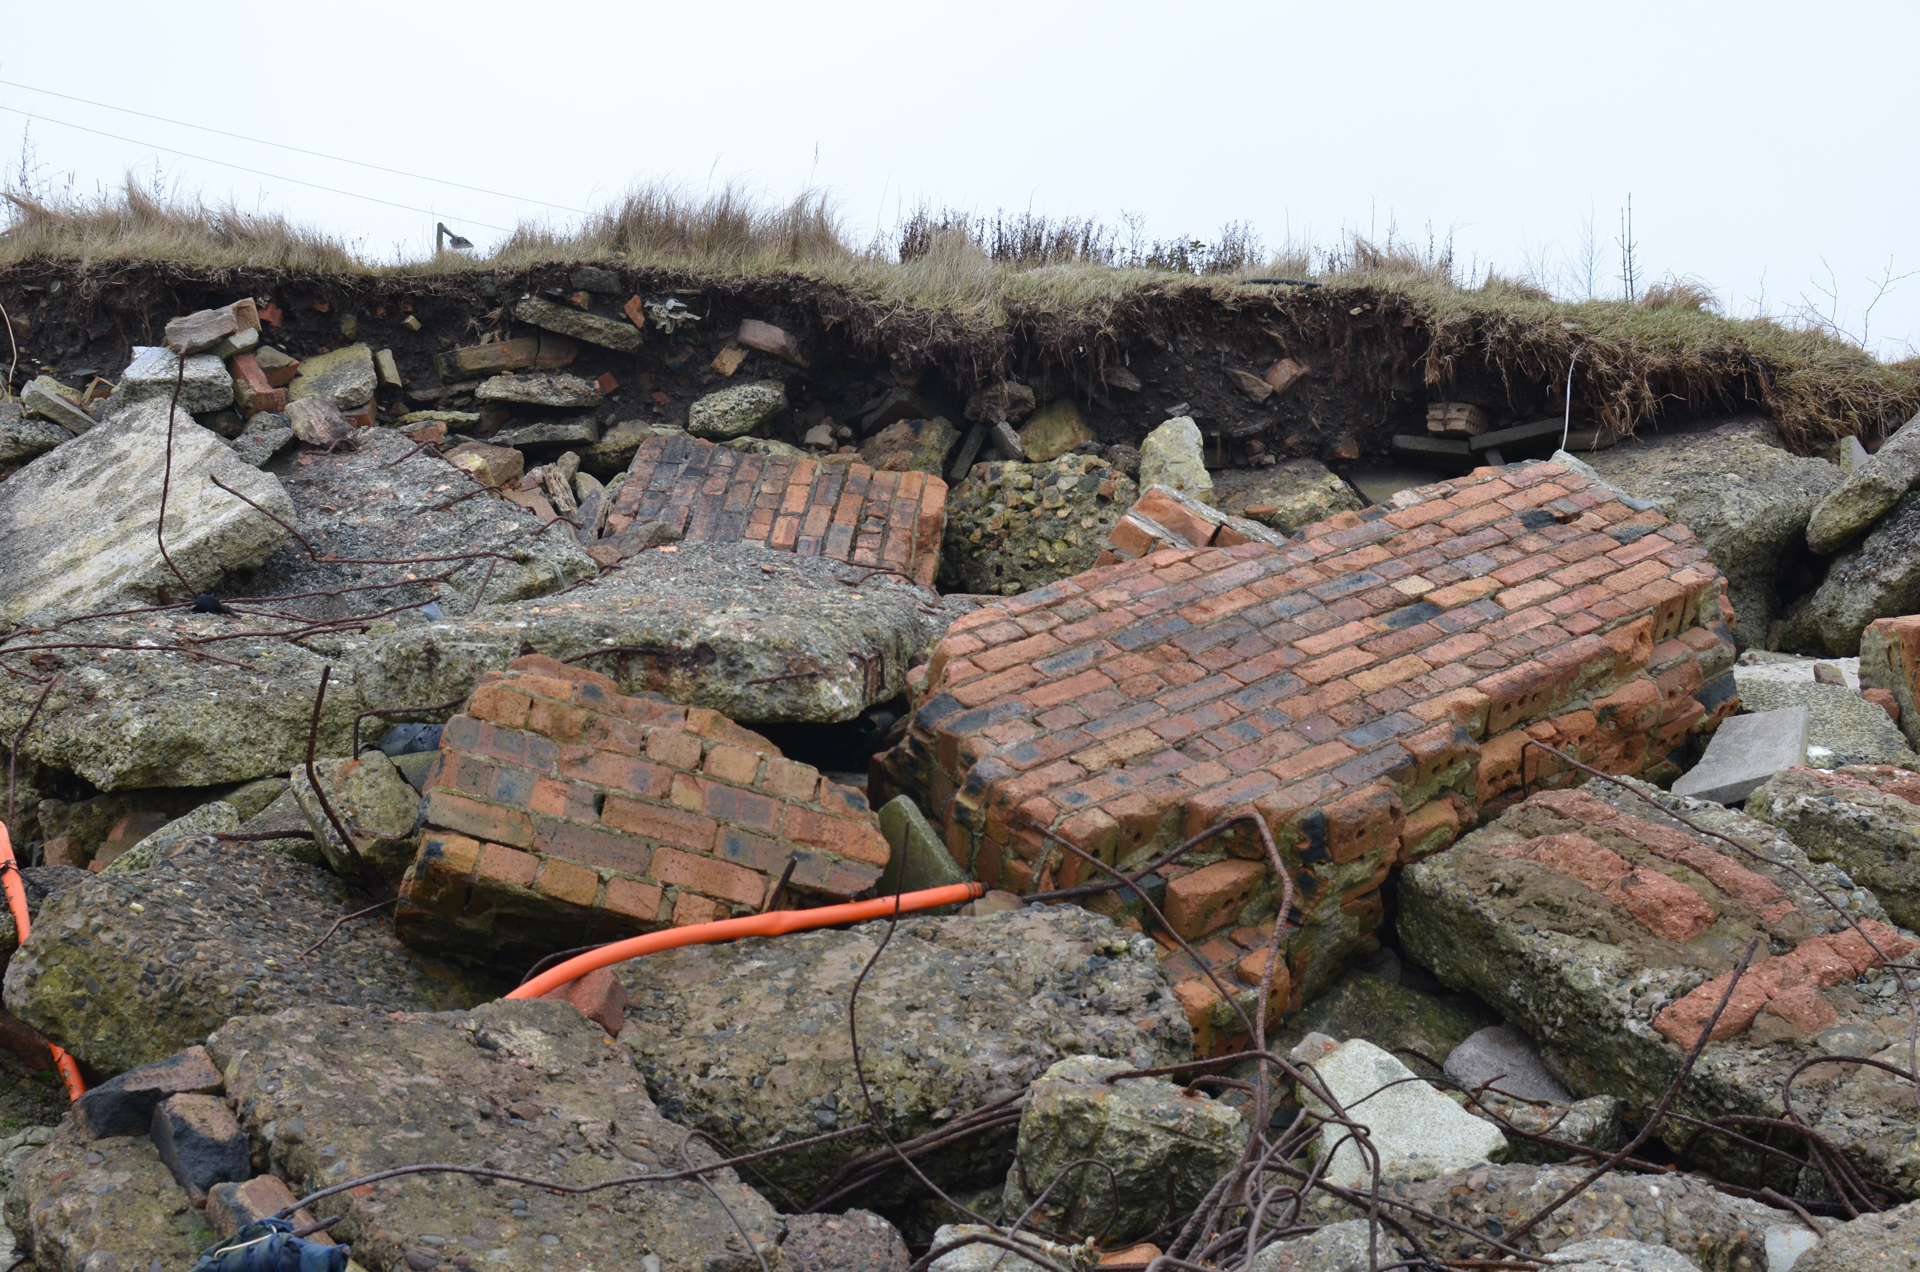 Demolition rubble dumped at Royston Beach, Granton, falls out of a cliff of soil in the background. The rubble comprises large chunks of brick walls, steel rebar and orange plastic tubing.